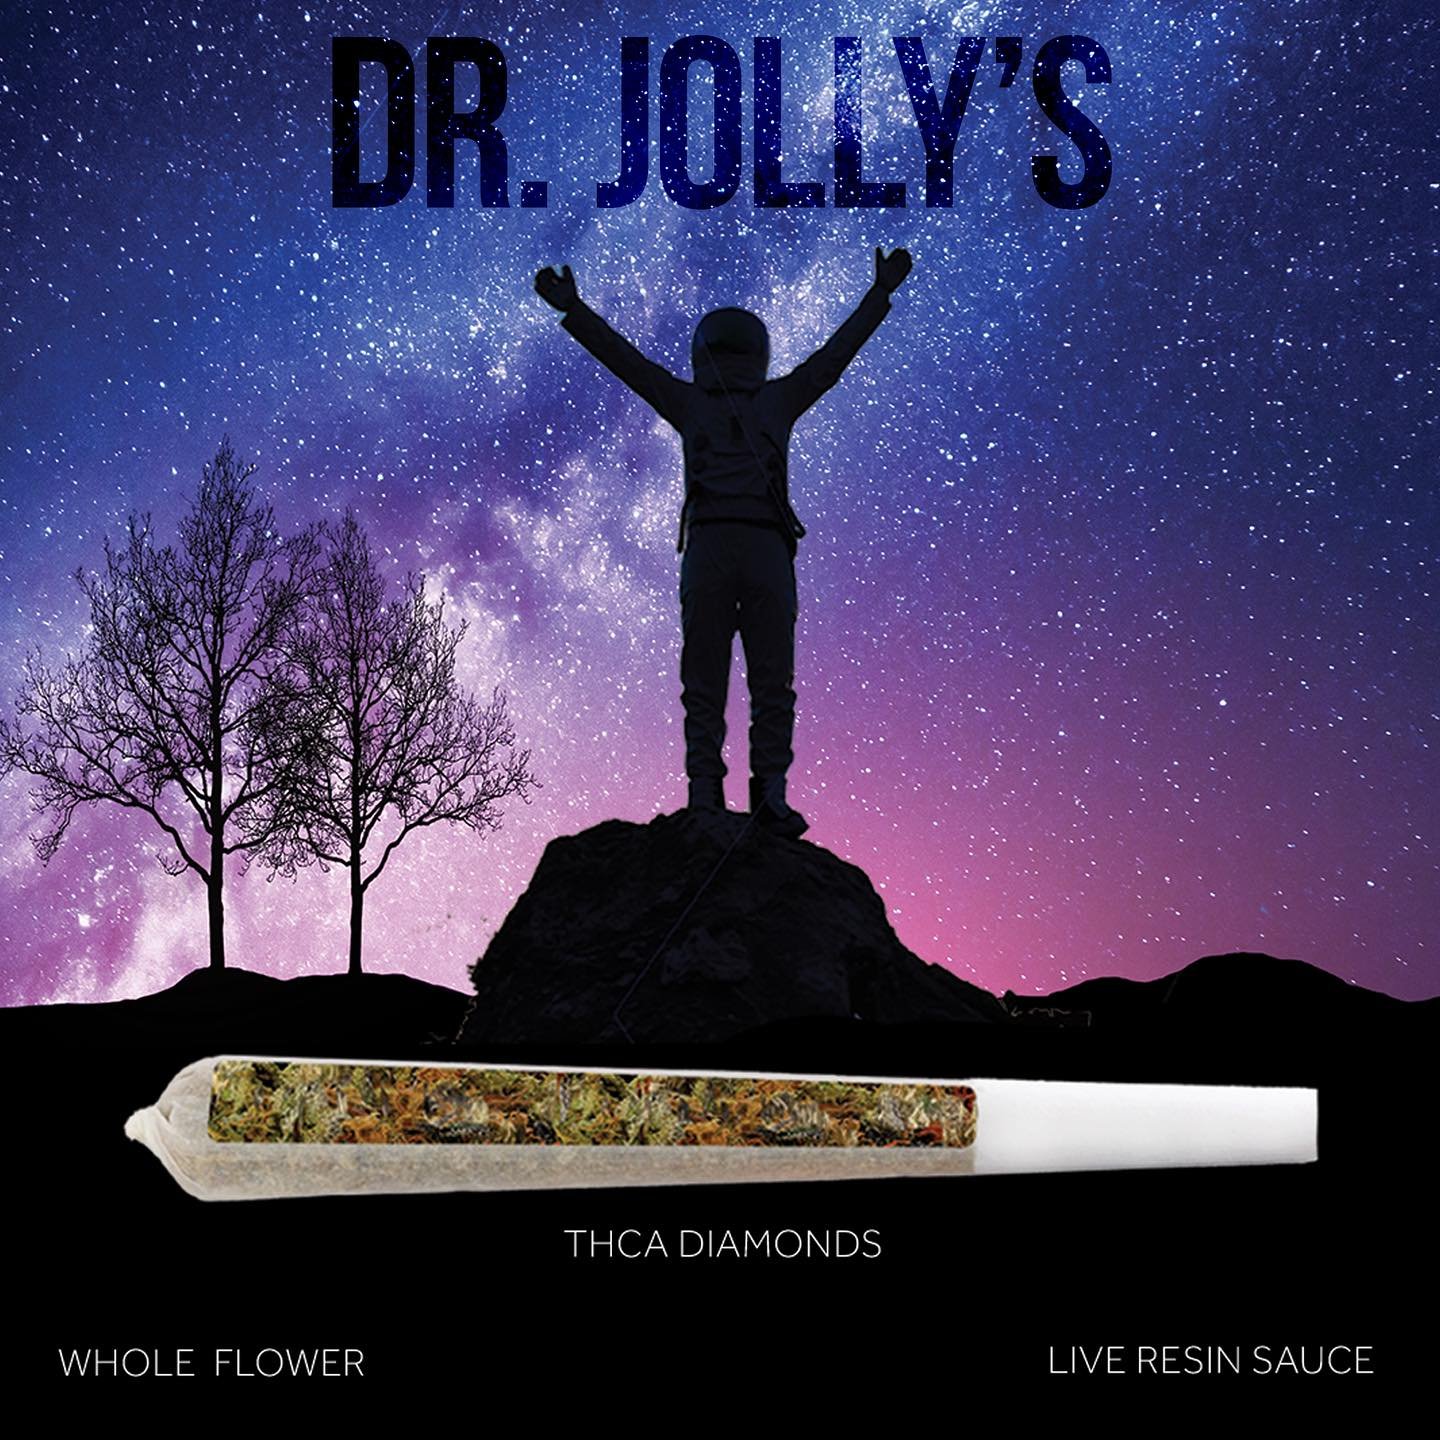 Transcend your expectations with our Diamond J infused pre-rolls!
.
#oregon #drj #stayjolly #drjollys #pnwadventures